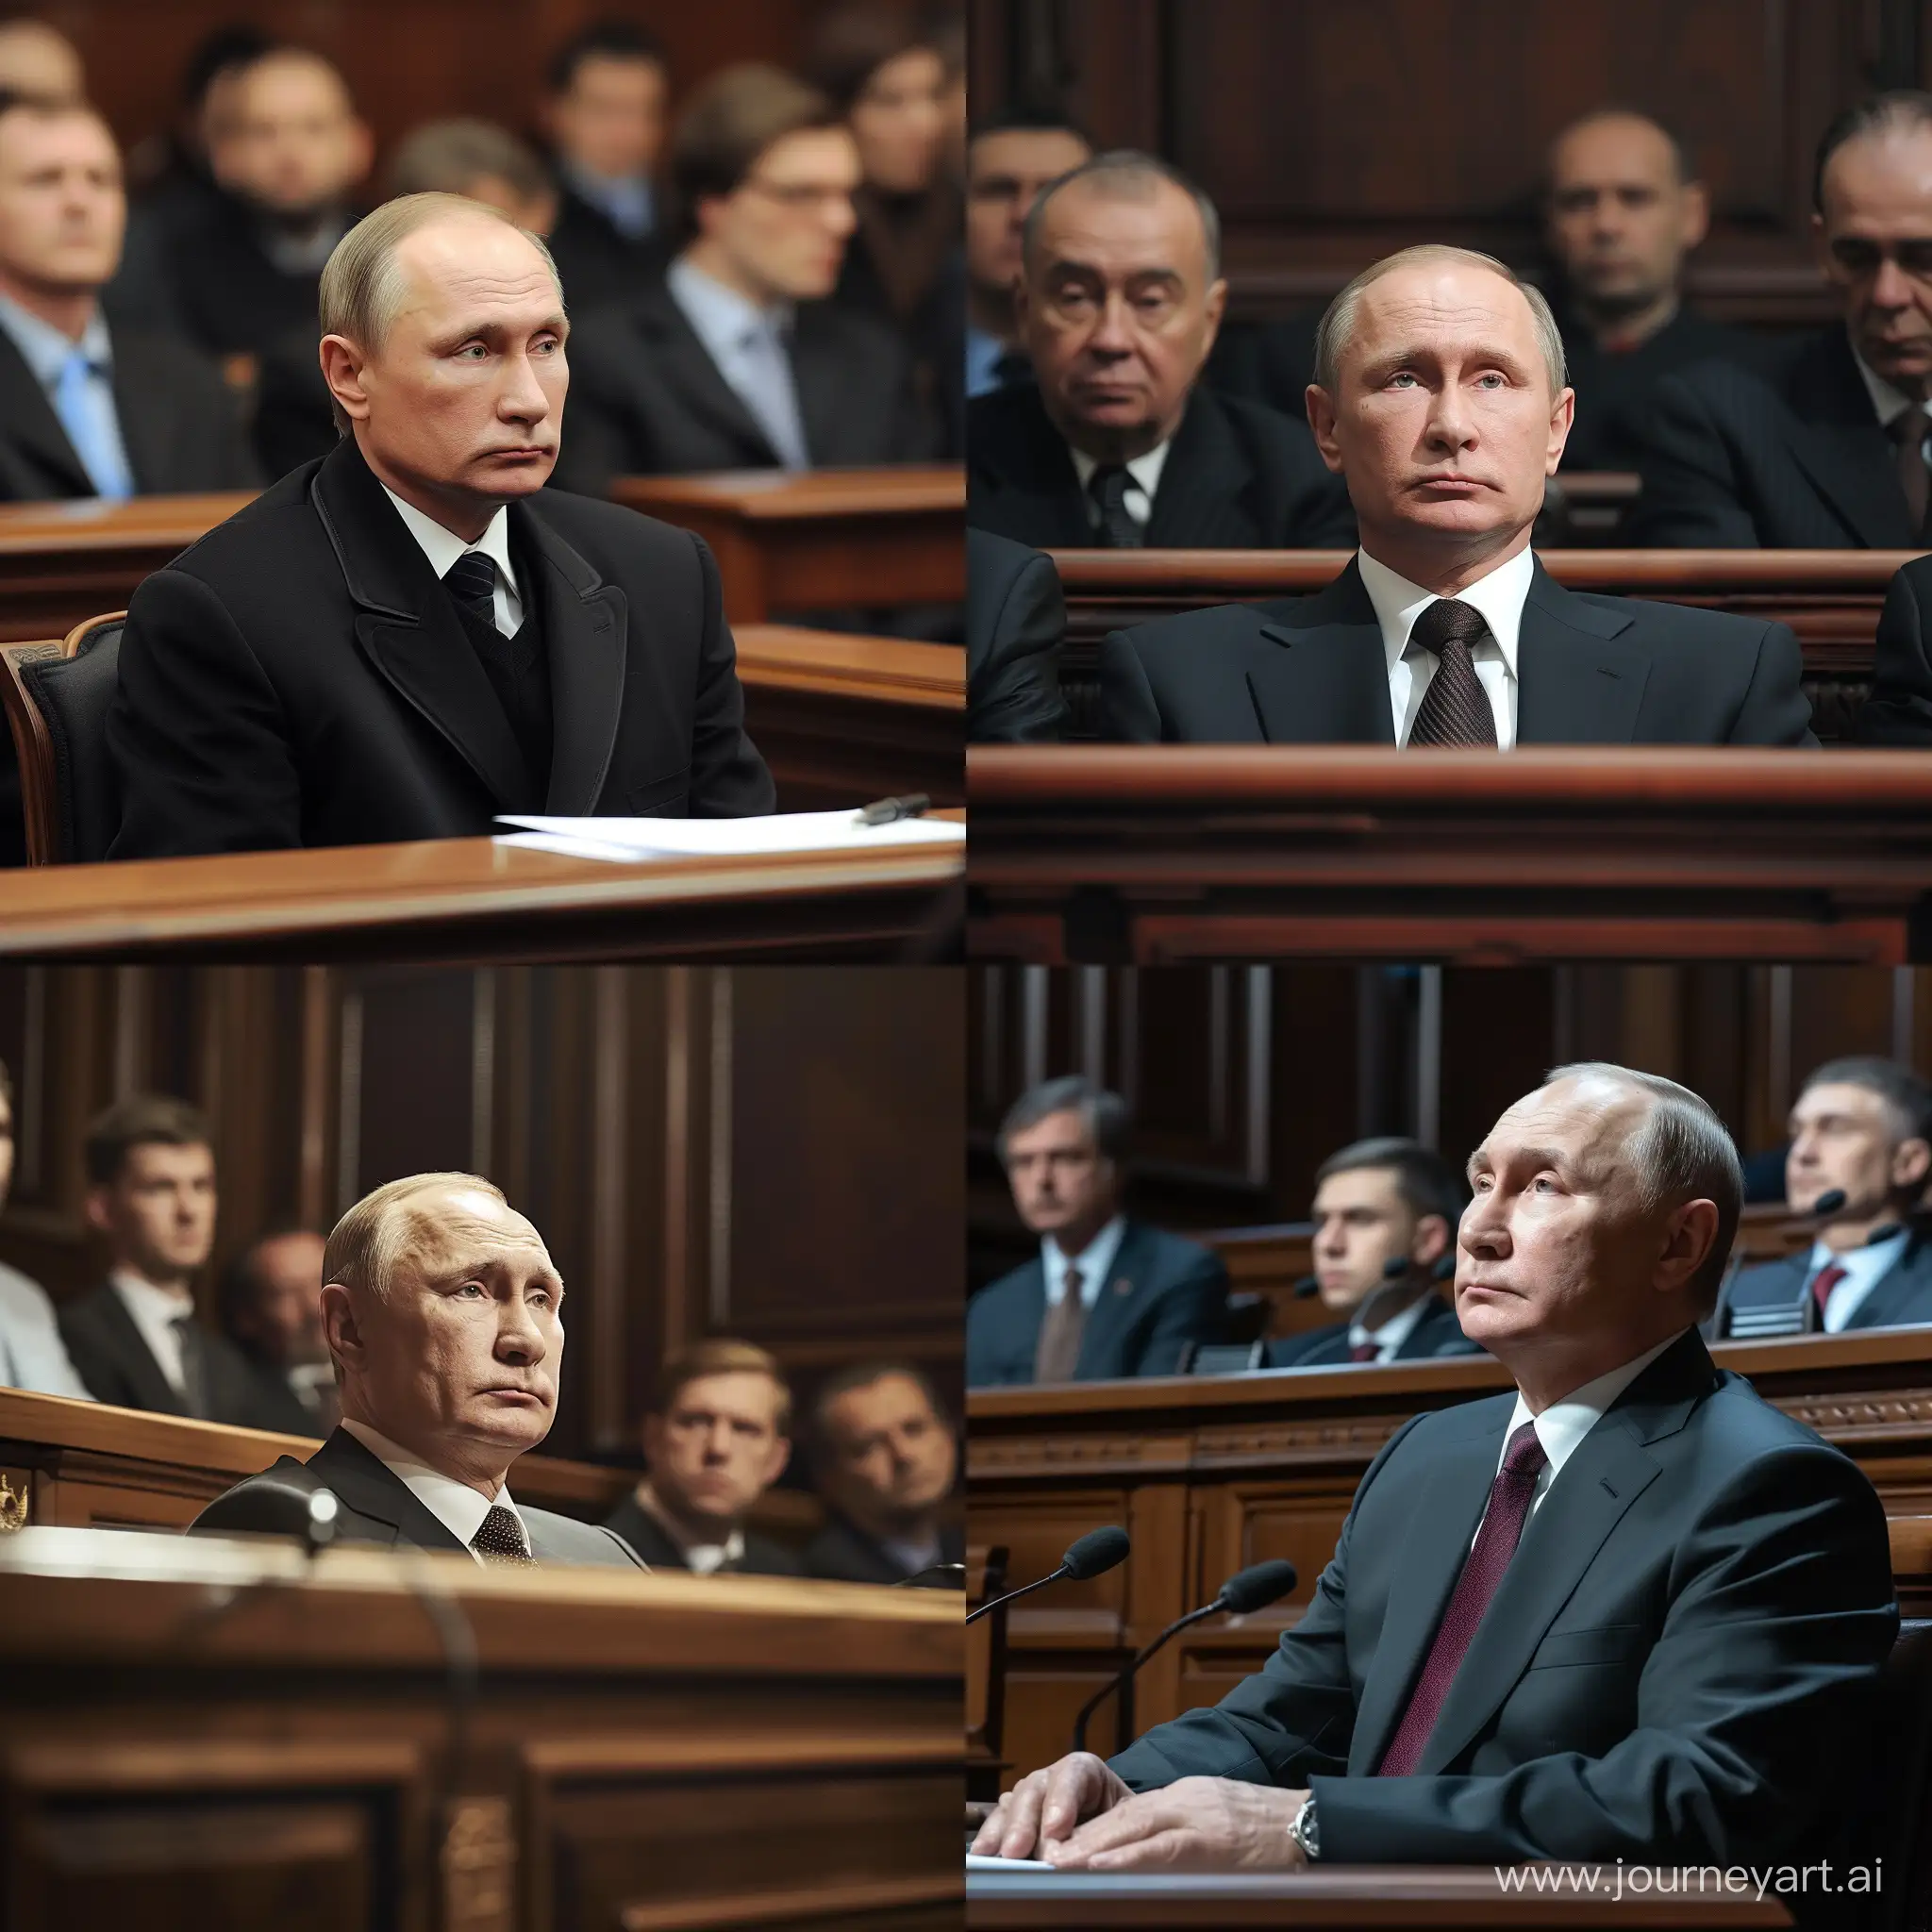 Putin-in-the-Courtroom-Legal-Proceedings-Image